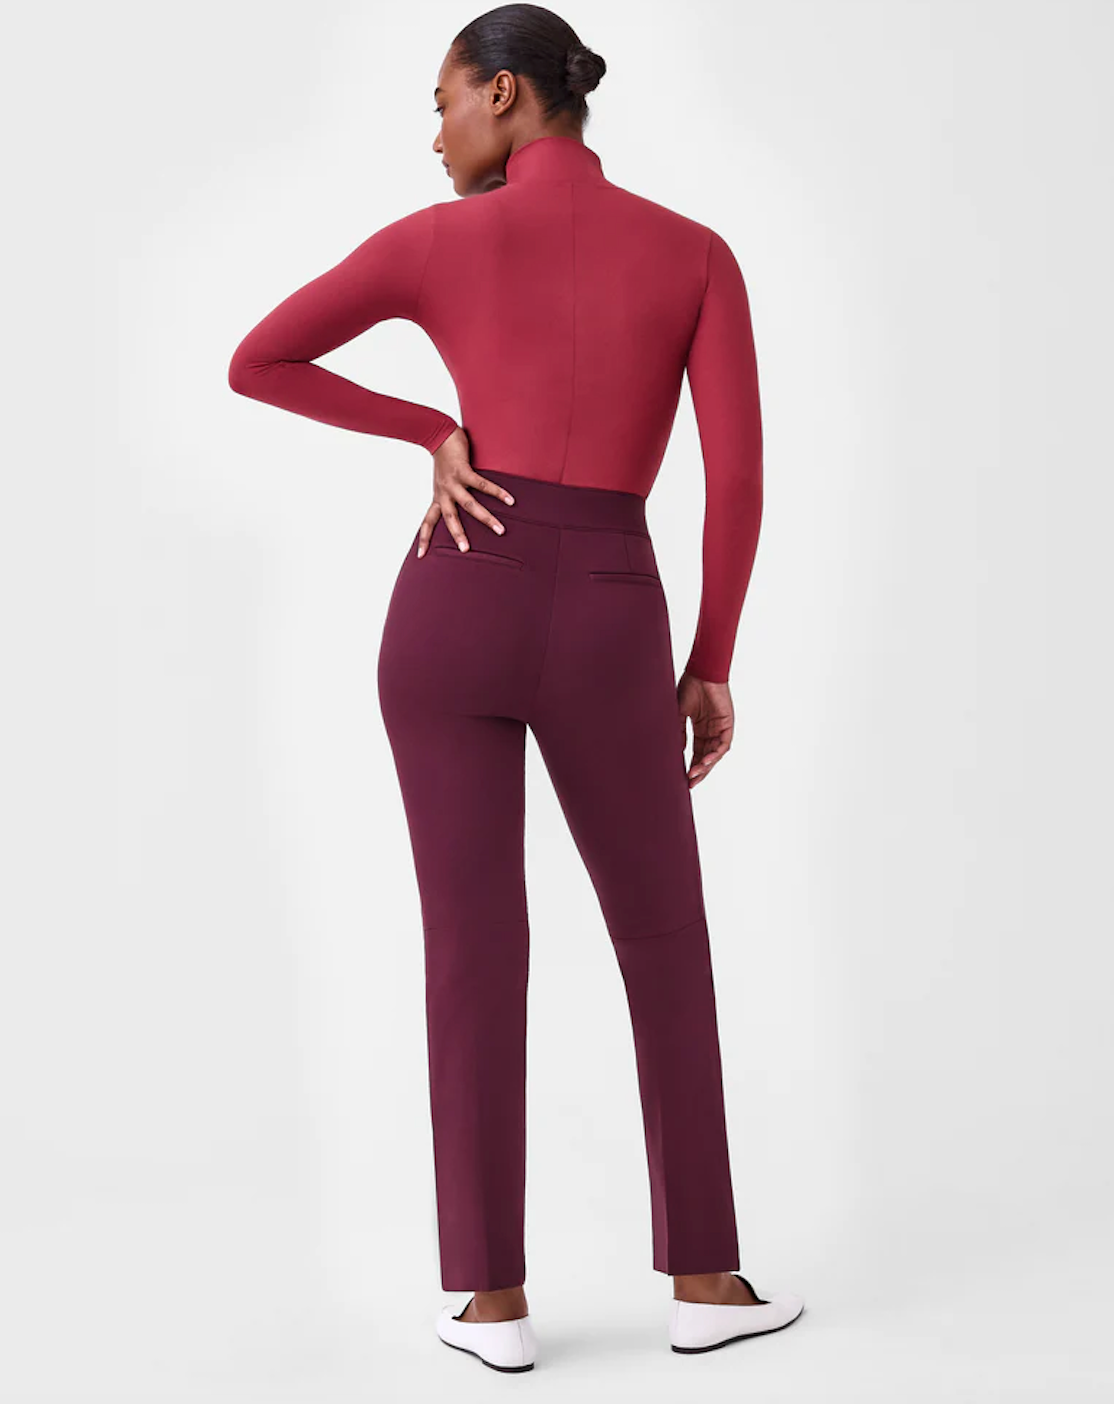 Women's Spanx Long-sleeved tops from $30